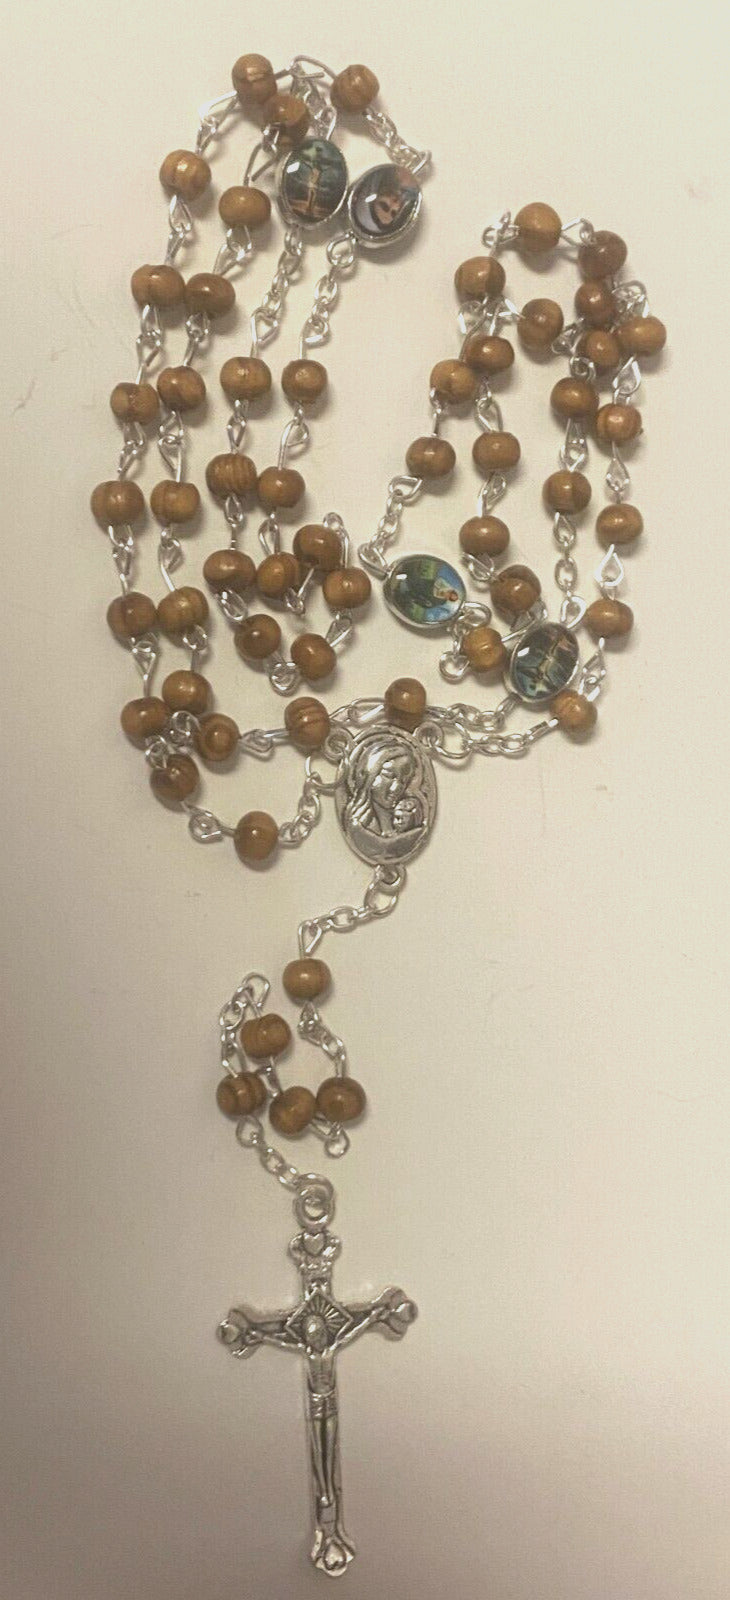 Olive Wood Small Bead Rosary,New from Jerusalem #1 - Bob and Penny Lord